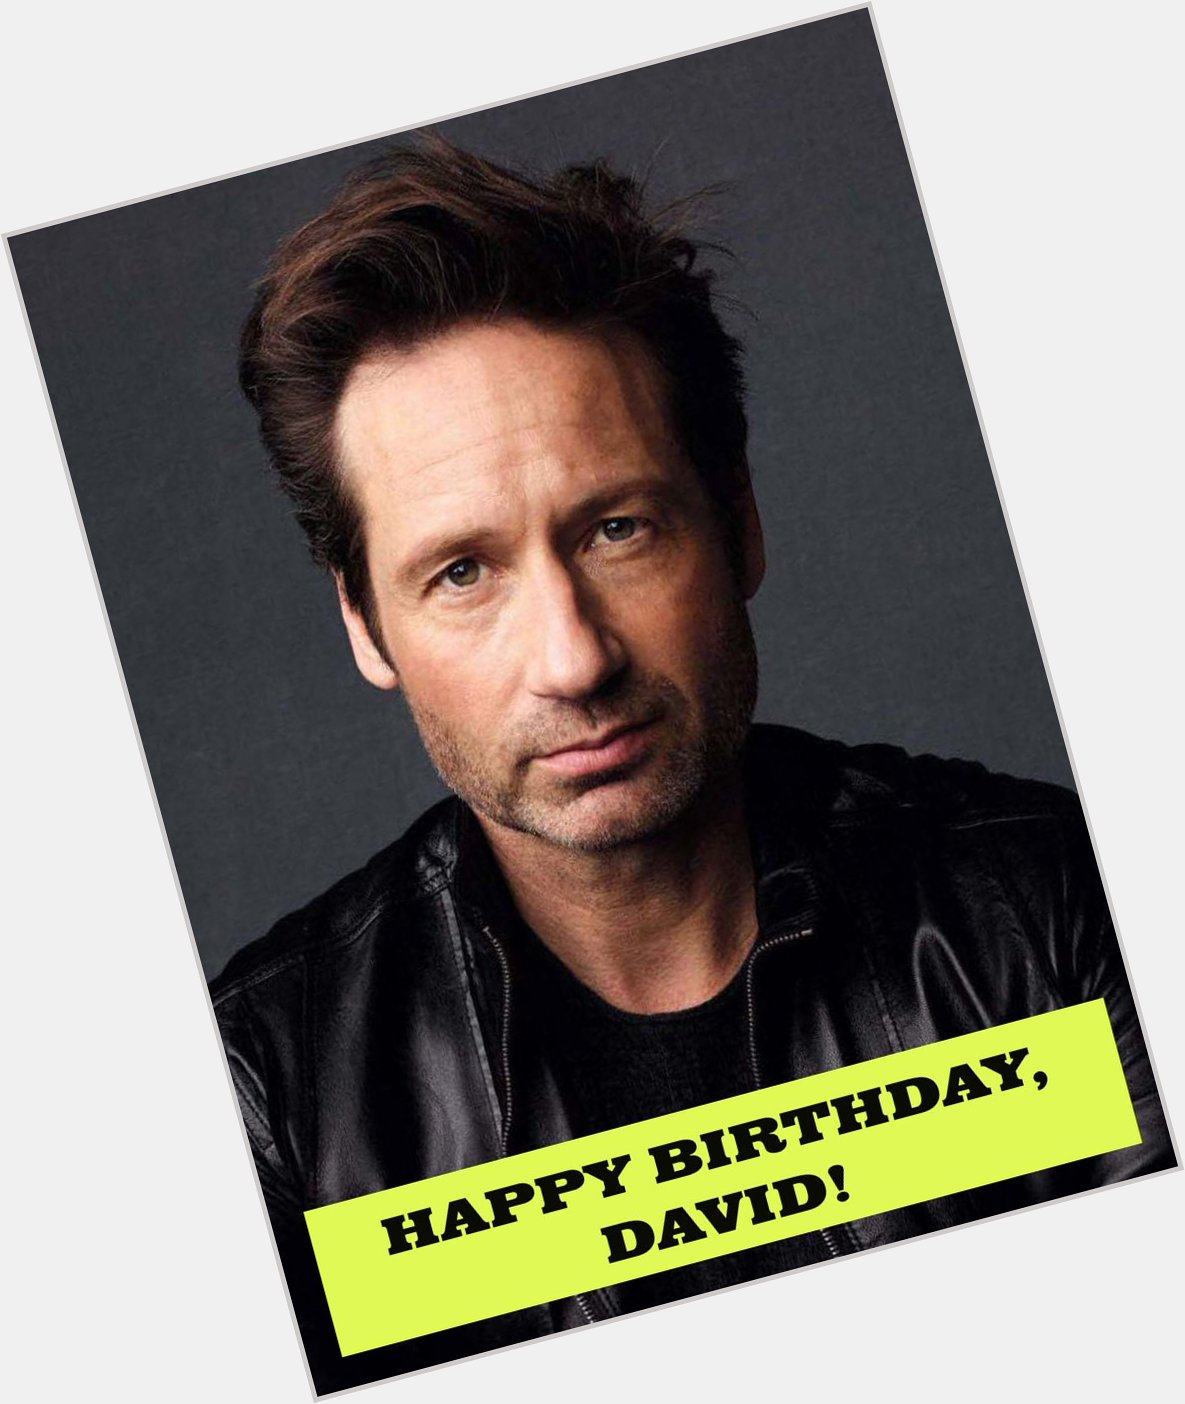 Happy Birthday to one our favorite actors, David Duchovny. X-files fans, rumor has it a new series is in the works 